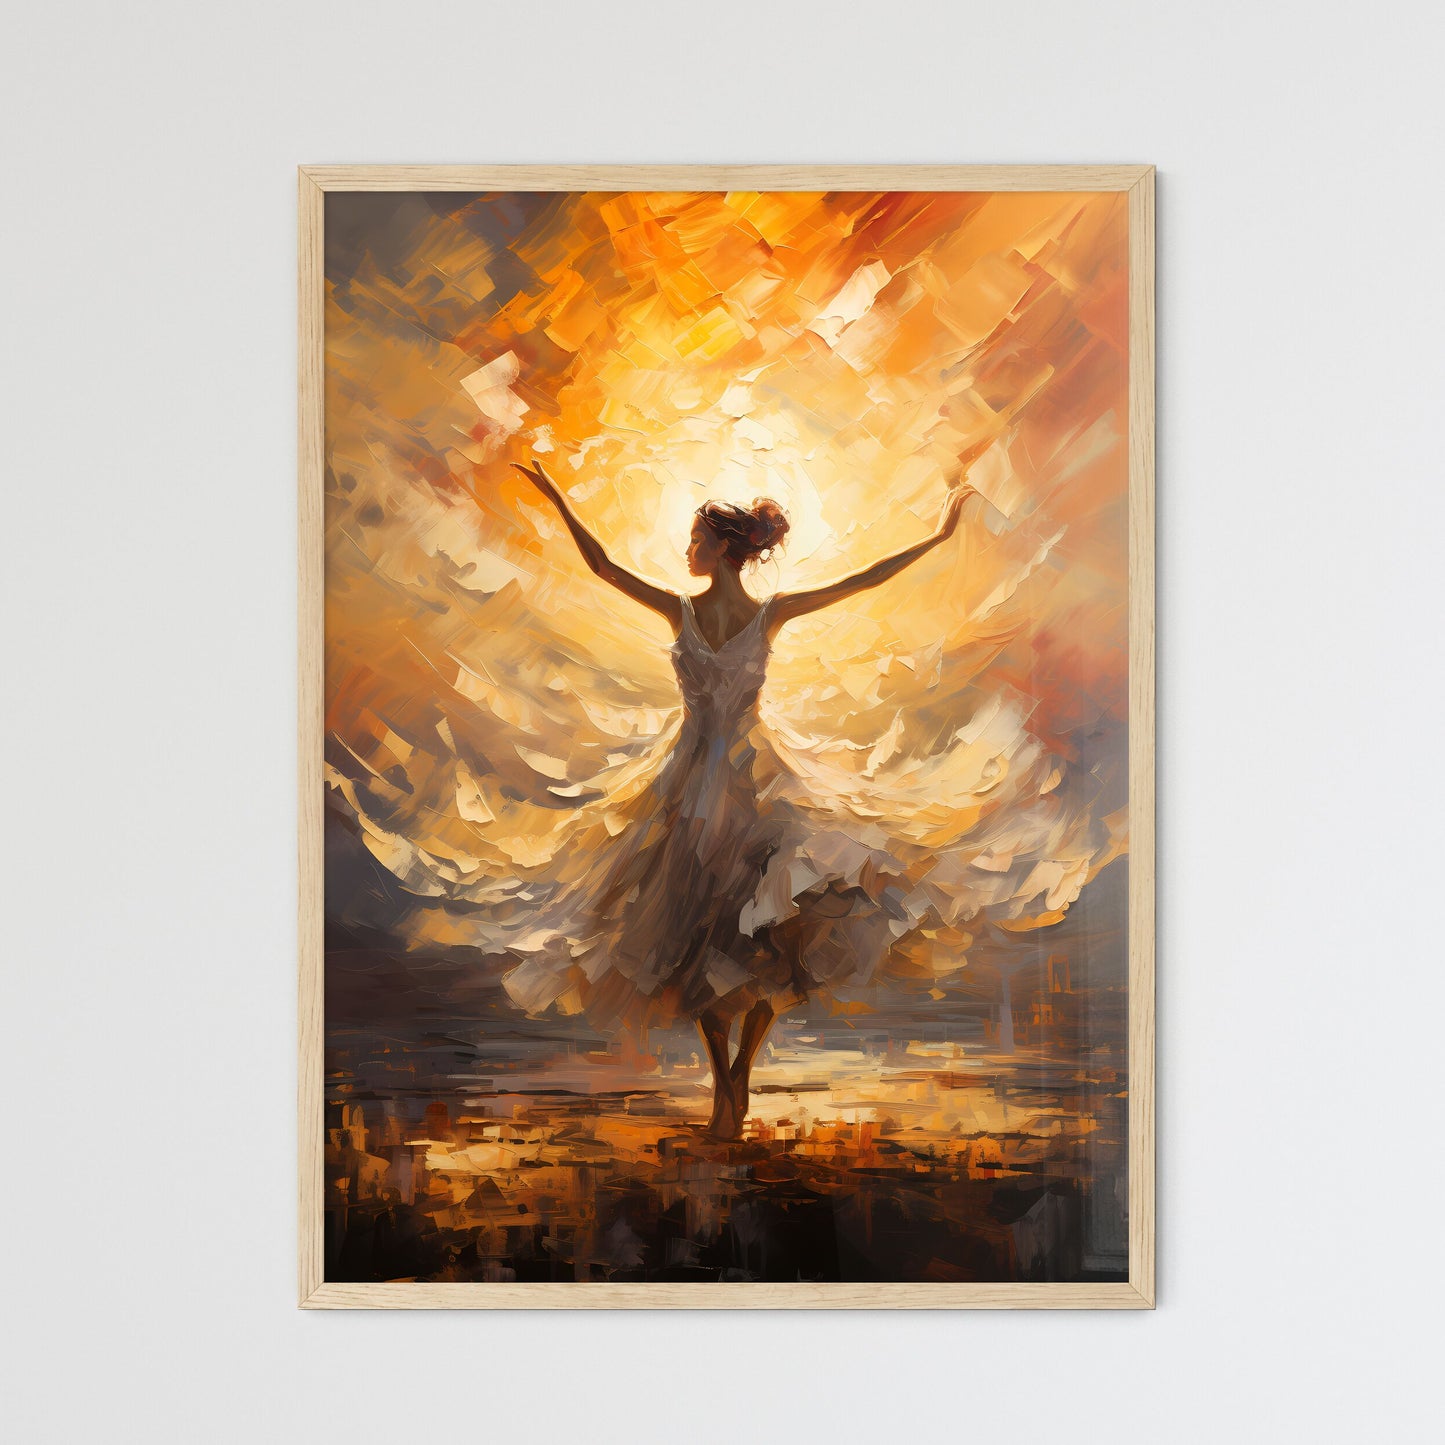 The Ballerina Soaring Against The Coming Sun - A Woman In A White Dress Dancing With Her Arms Up Default Title